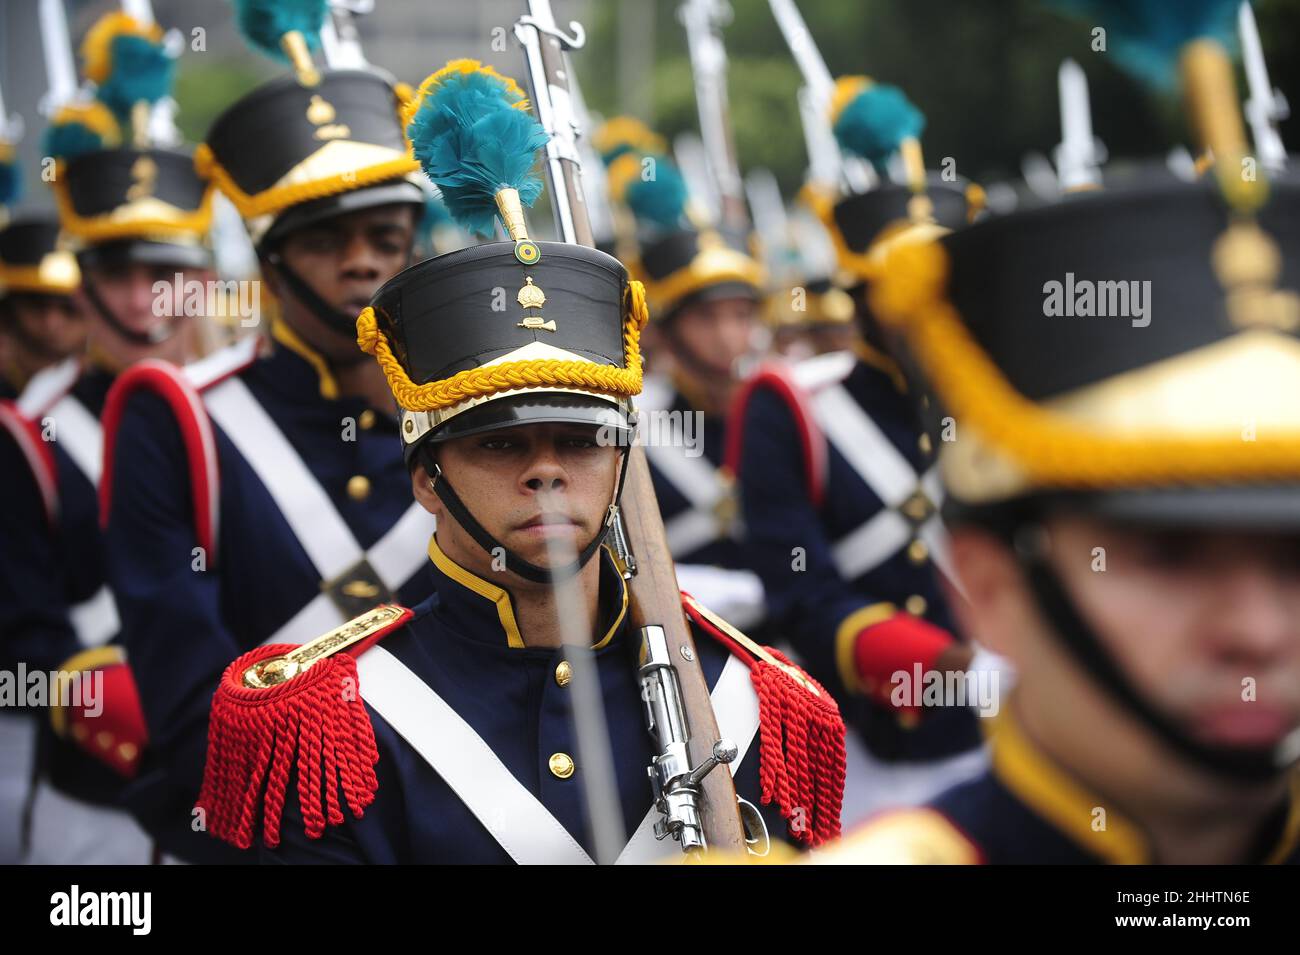 Military parade on Independence Day. Brazilian armed forces historical uniform troops marching on street Stock Photo